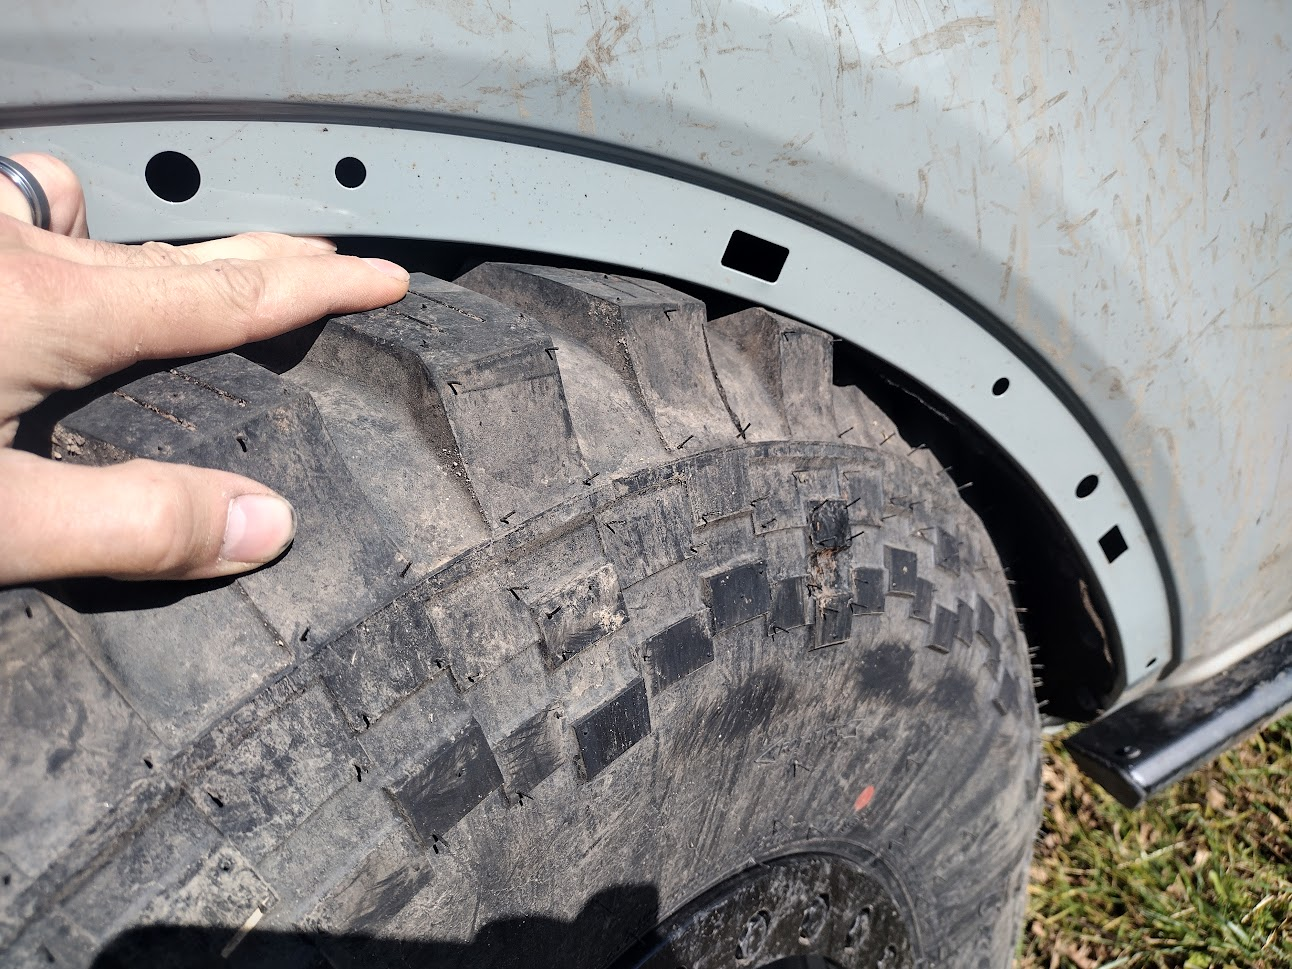 Ford Bronco 37" Tires on a Non-Sasquatch Badlands - My Experience, Results, Pics 1666477503240